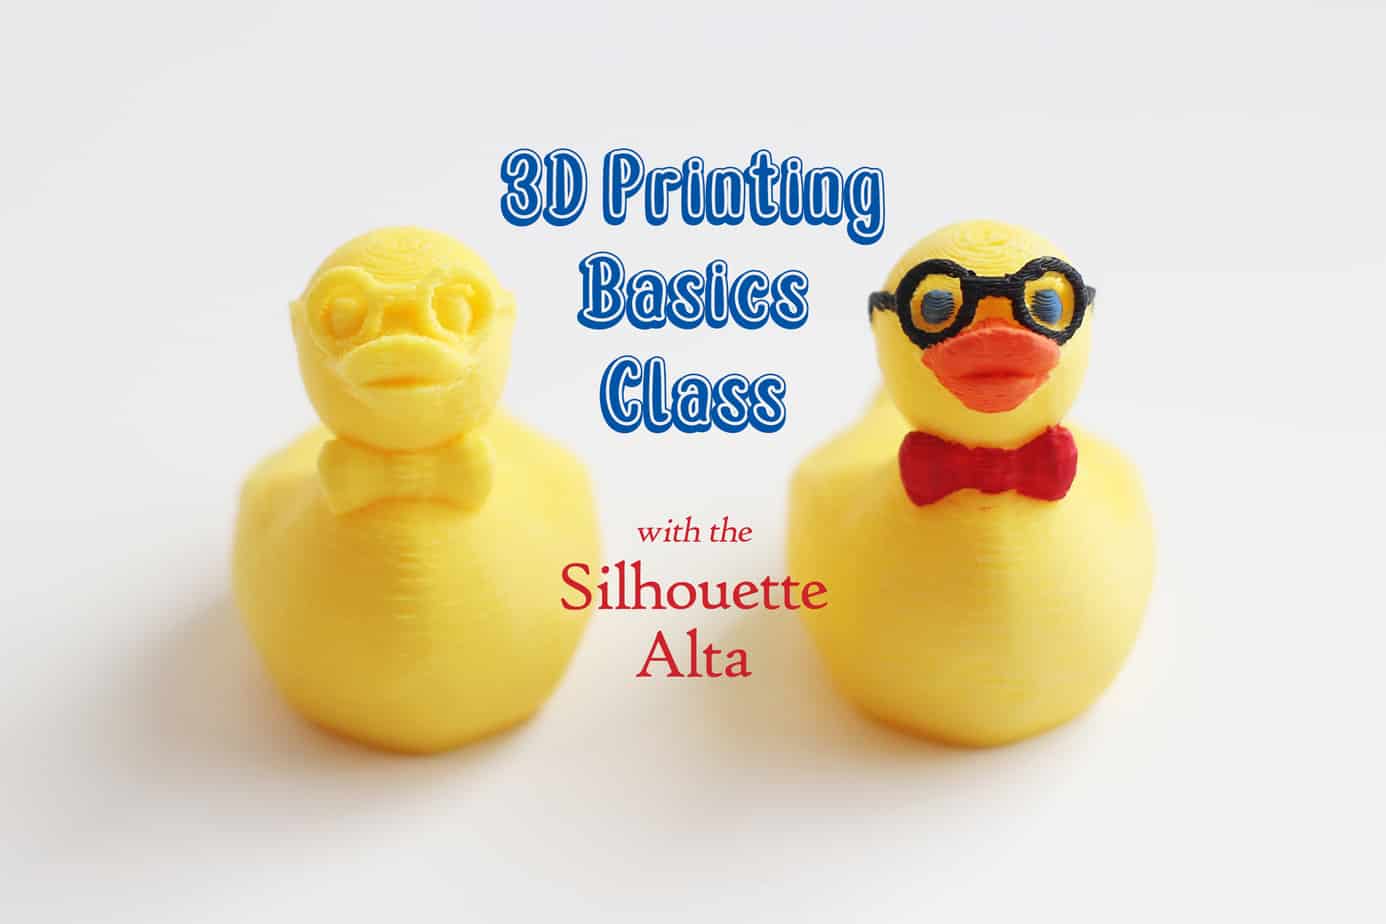 3D Printing Basics Class with the Silhouette Alta